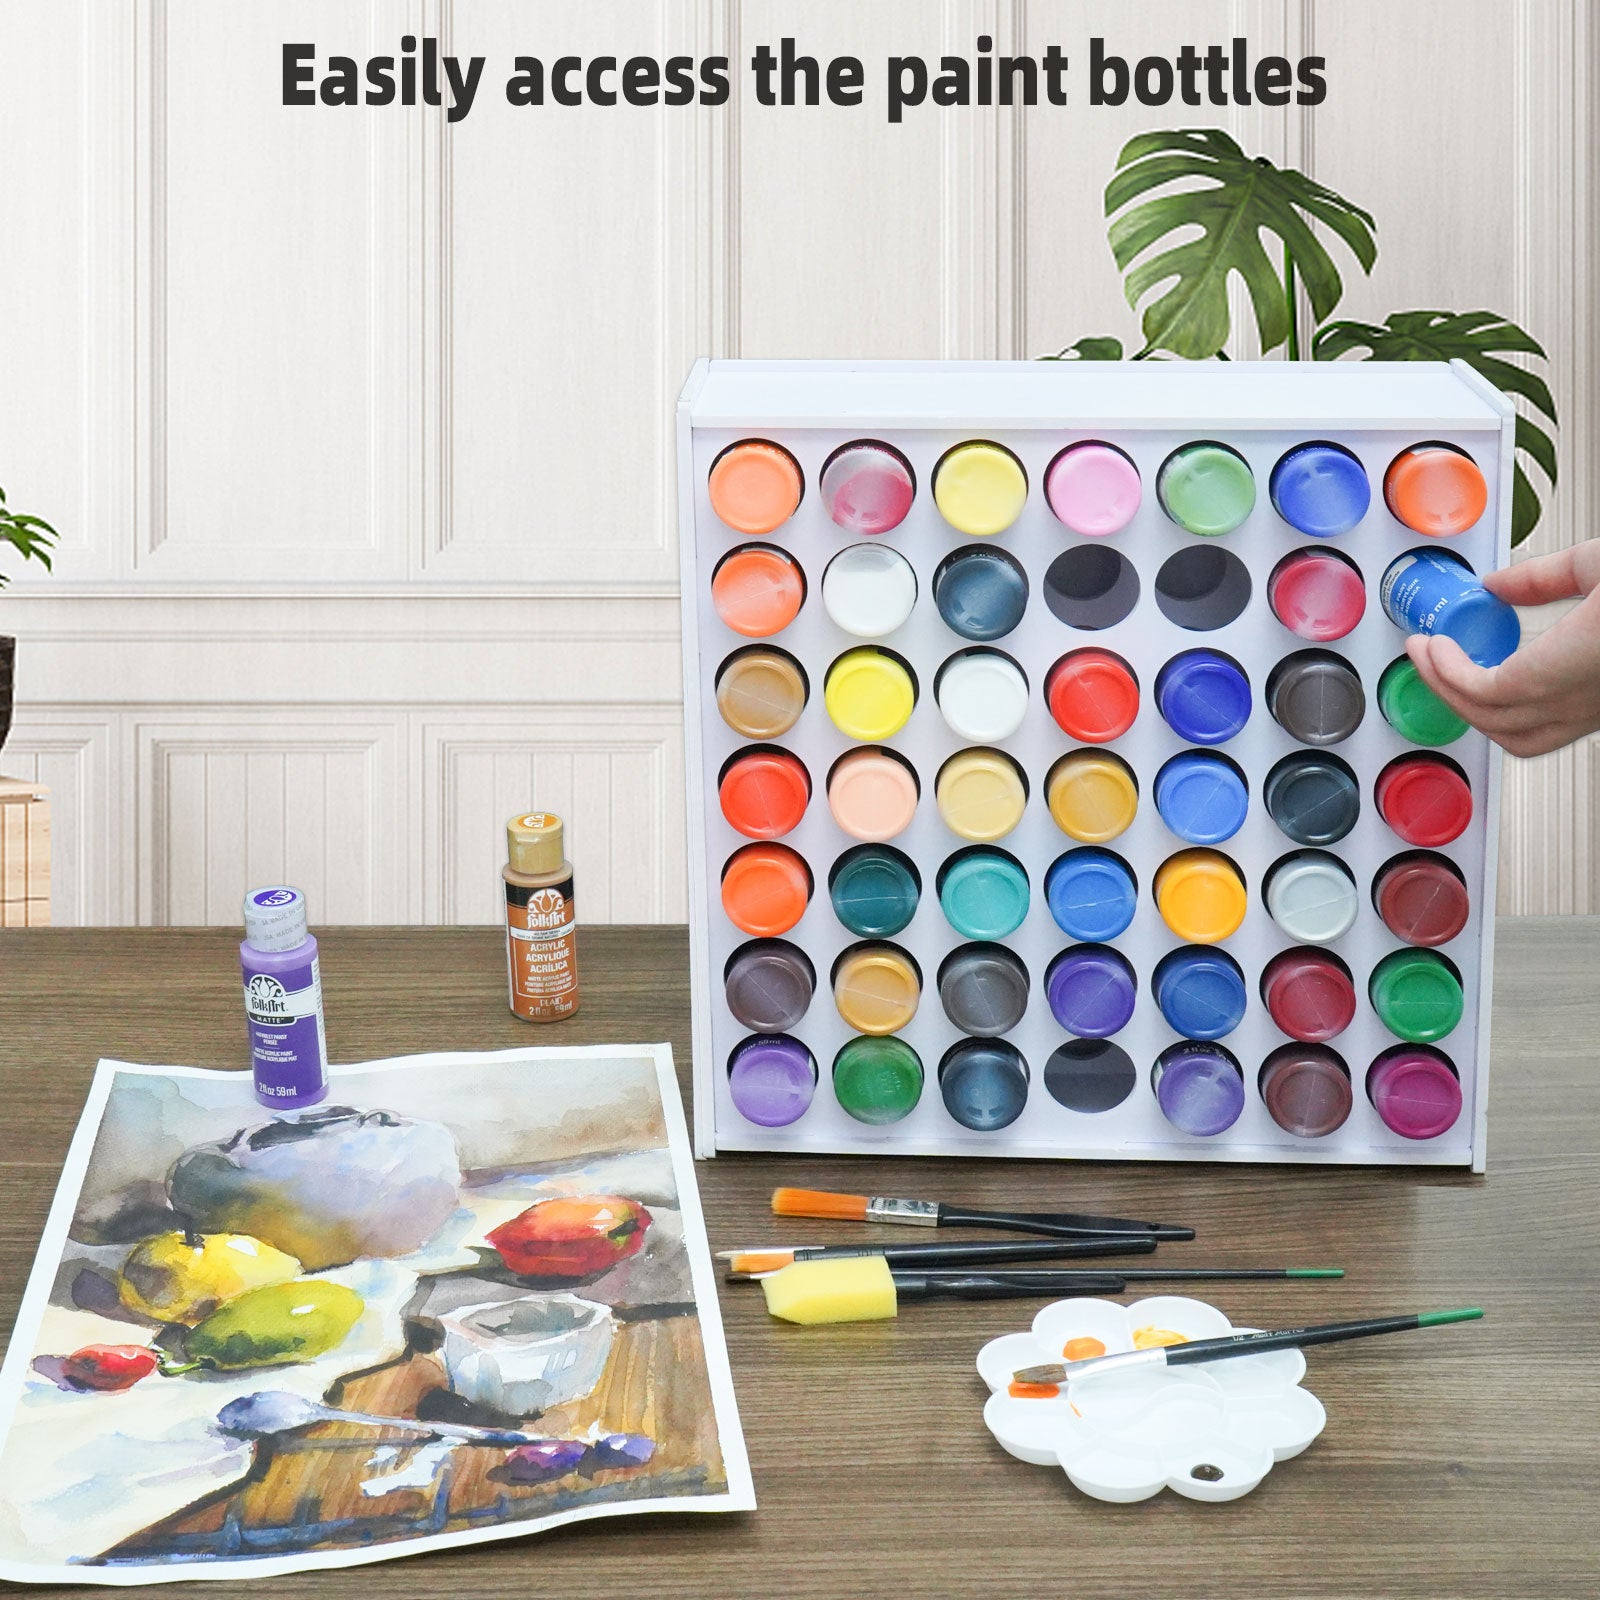 How to make a cheap paint rack for 2oz bottles 